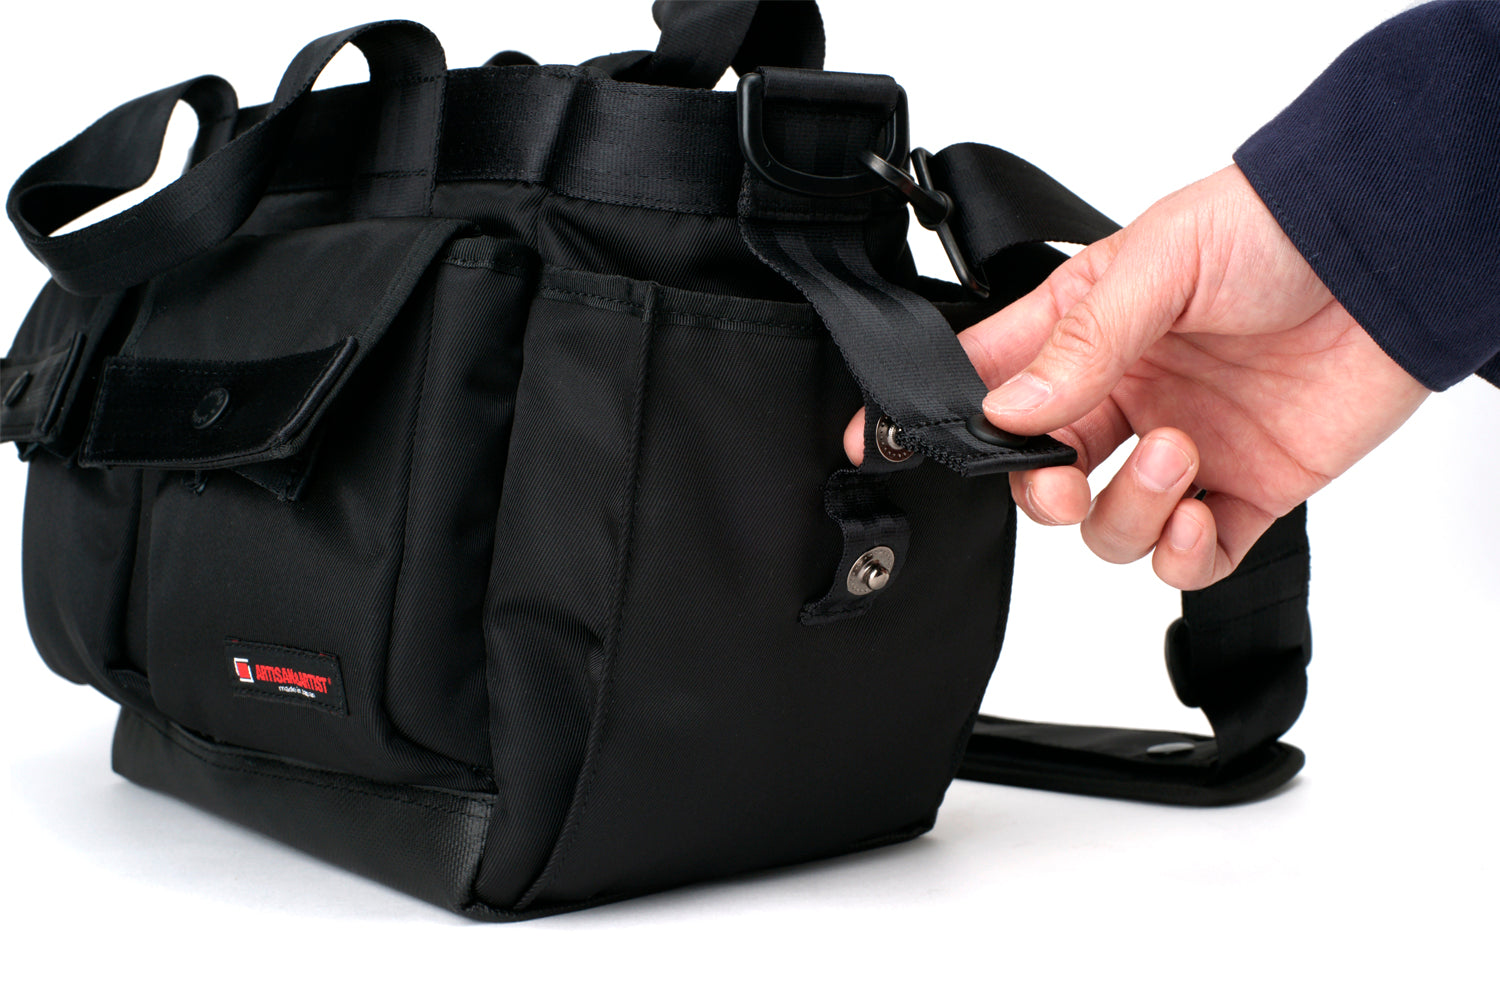 Shoulder-tote-type camera bag with a wide opening.